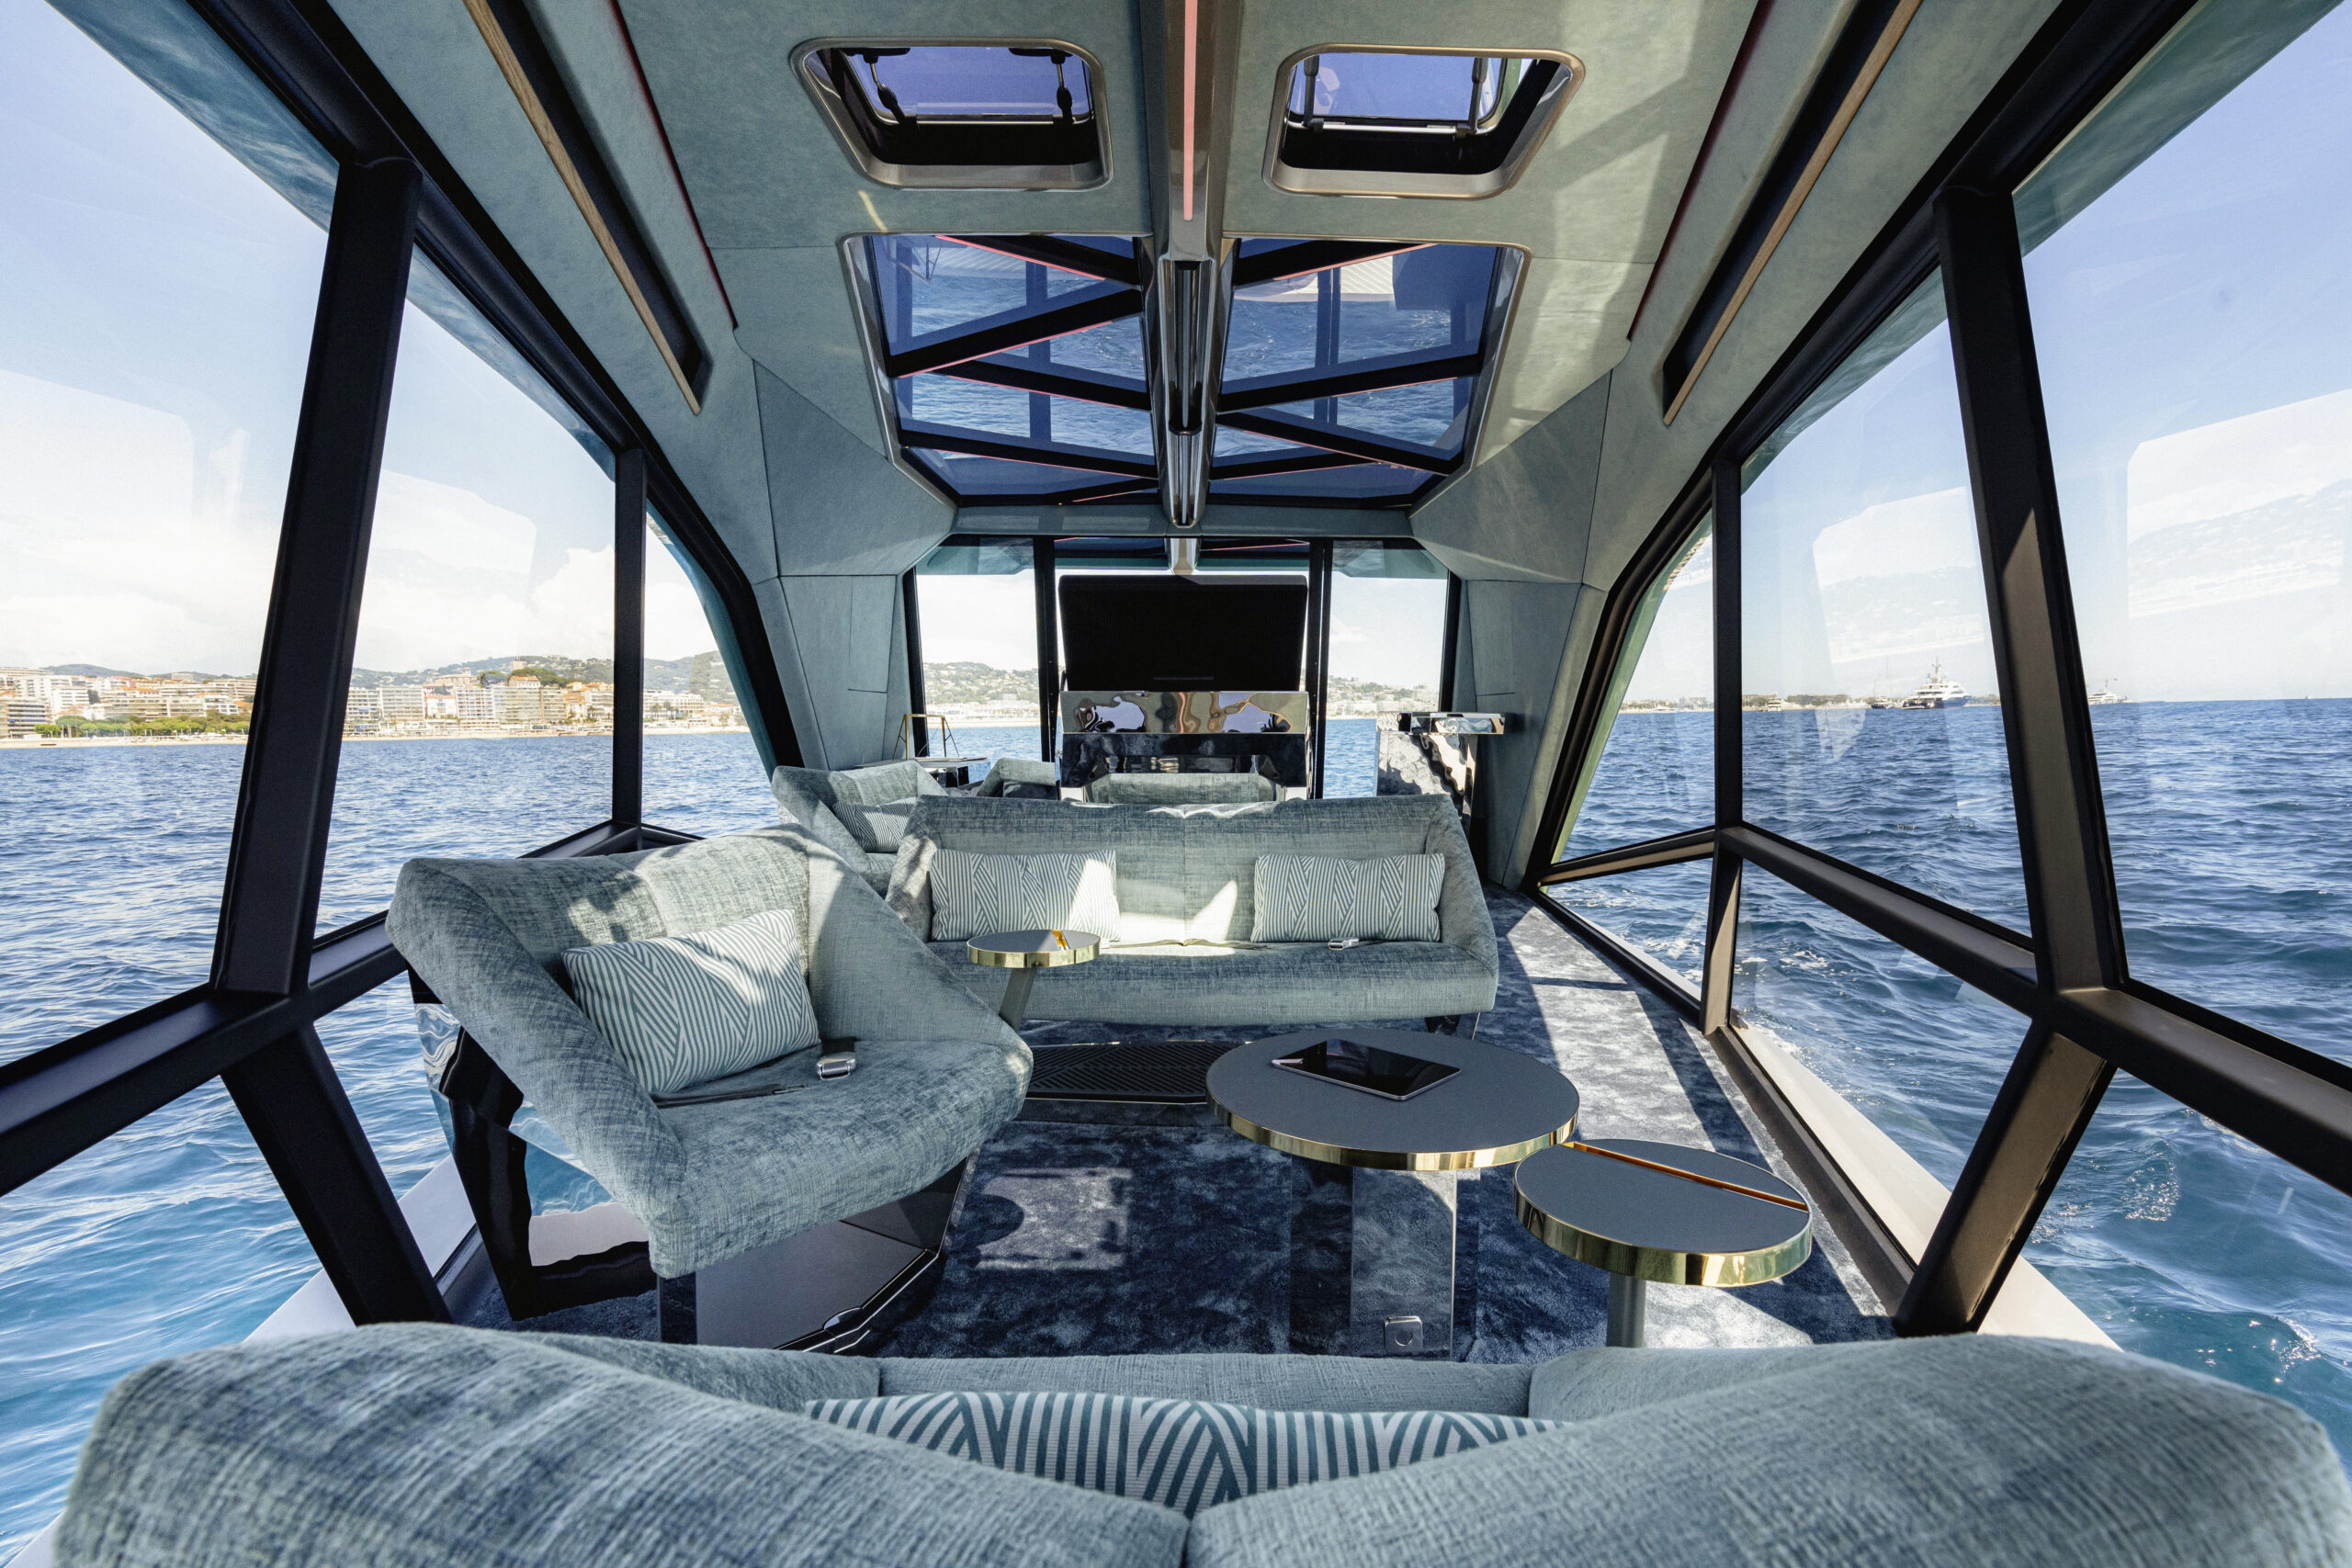 BMW And Tyde Flagship Mobility On Water - The Sustainable Yacht - ICON (1)